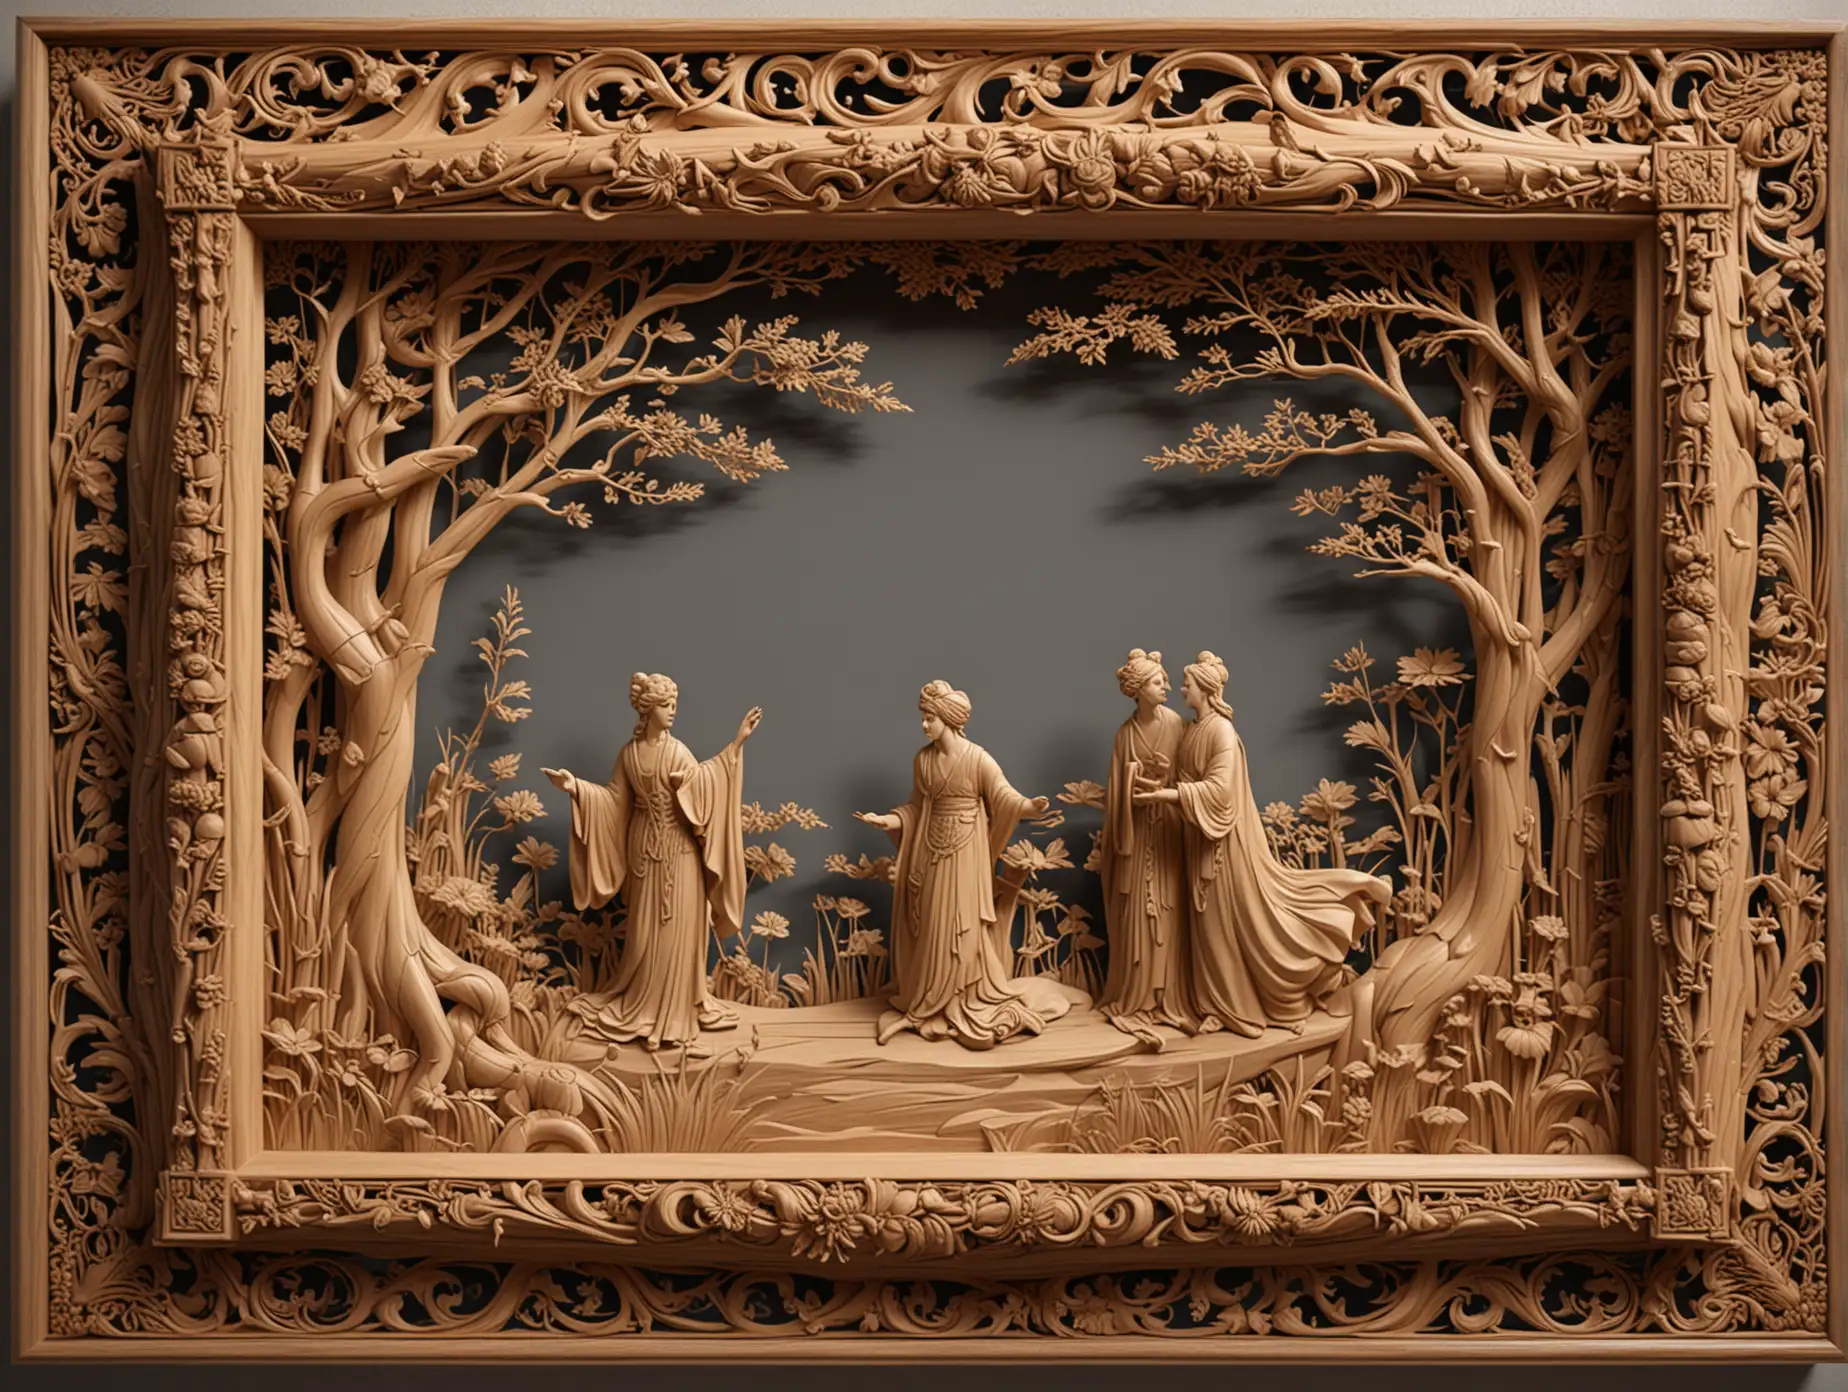 3d and tilable wood lacquer frame surround, featuring a finely carved wooden scene from the Aladdin in the style of Aubrey beardsley